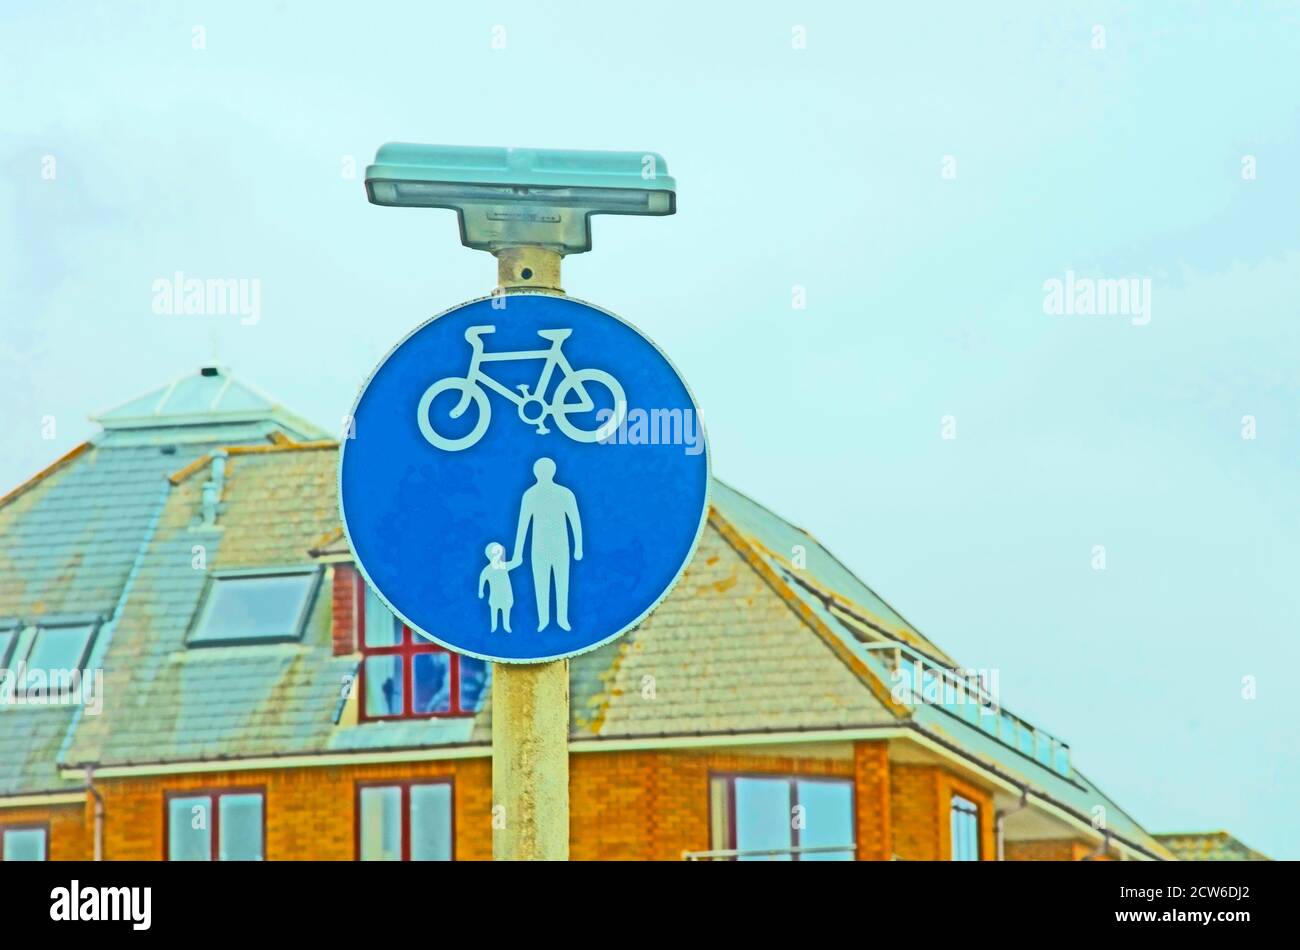 Pavement Pedestrian and Cycle Sign Seaford Sussex England UK United Kingdom Stock Photo